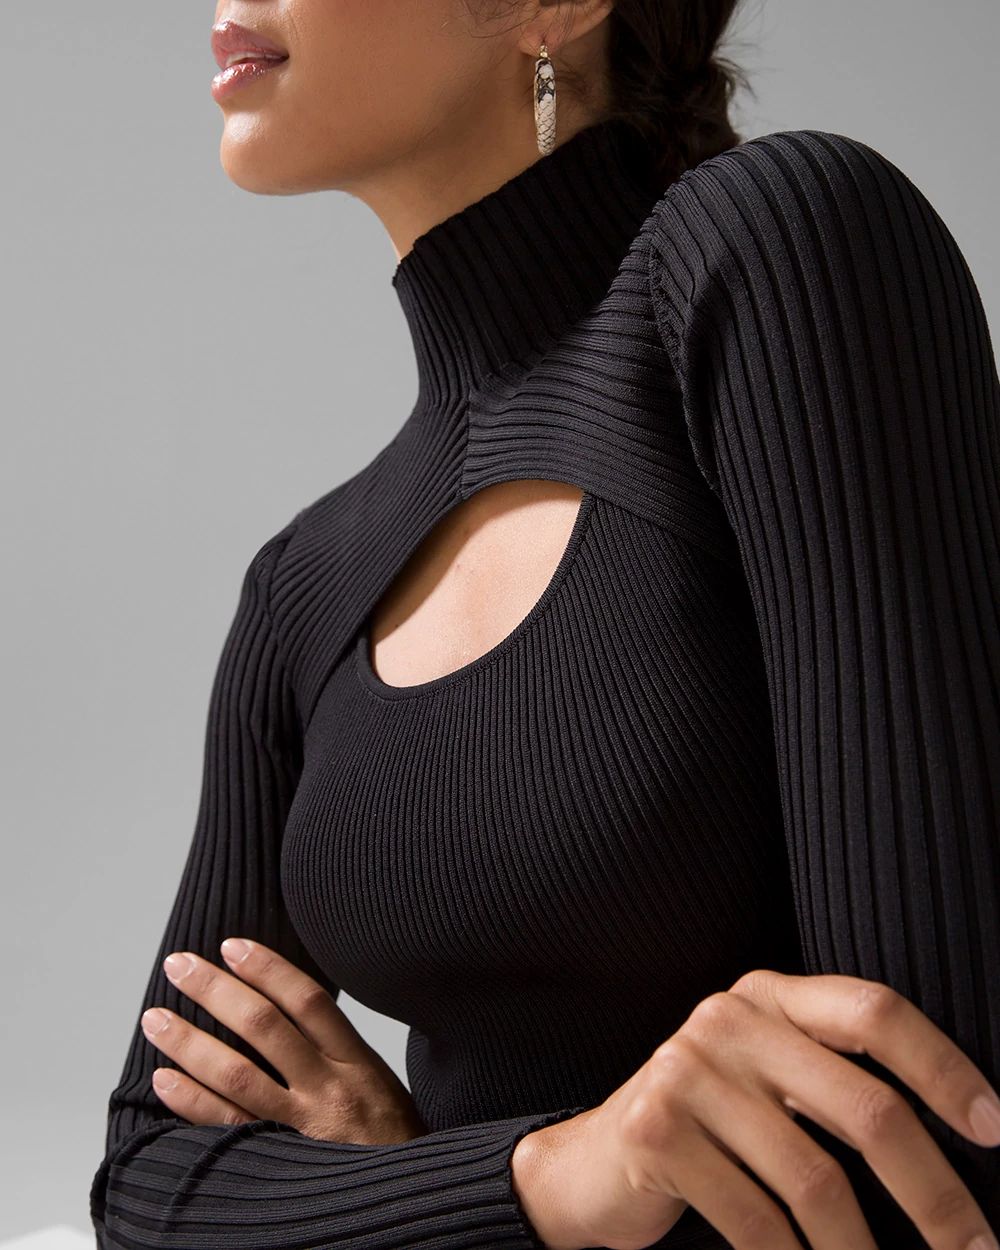 Long Sleeve Cutout Turtleneck Sweater click to view larger image.